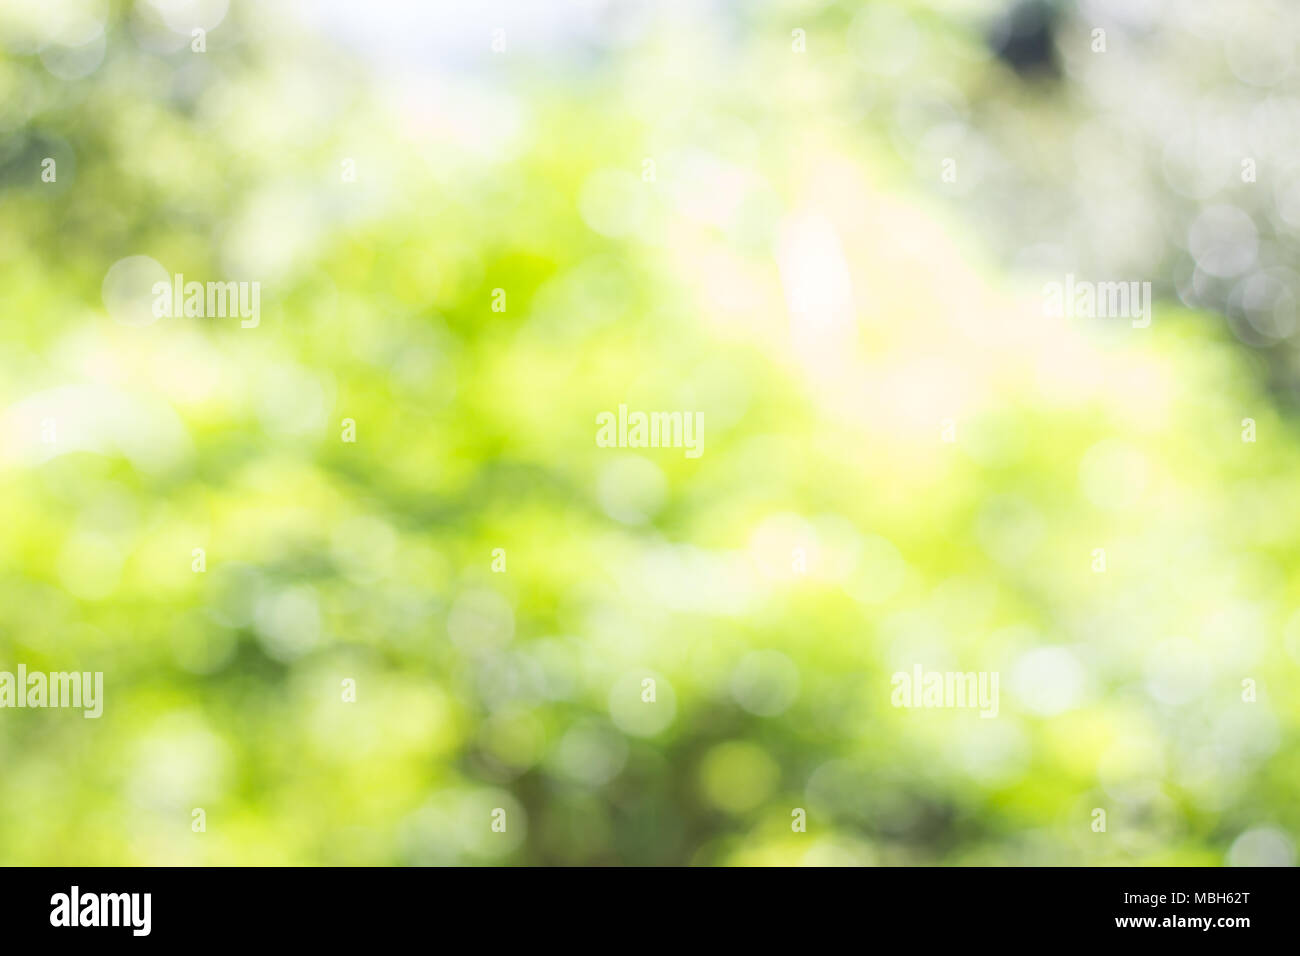 Blur bokeh background, Natural blurred background In public park Stock Photo